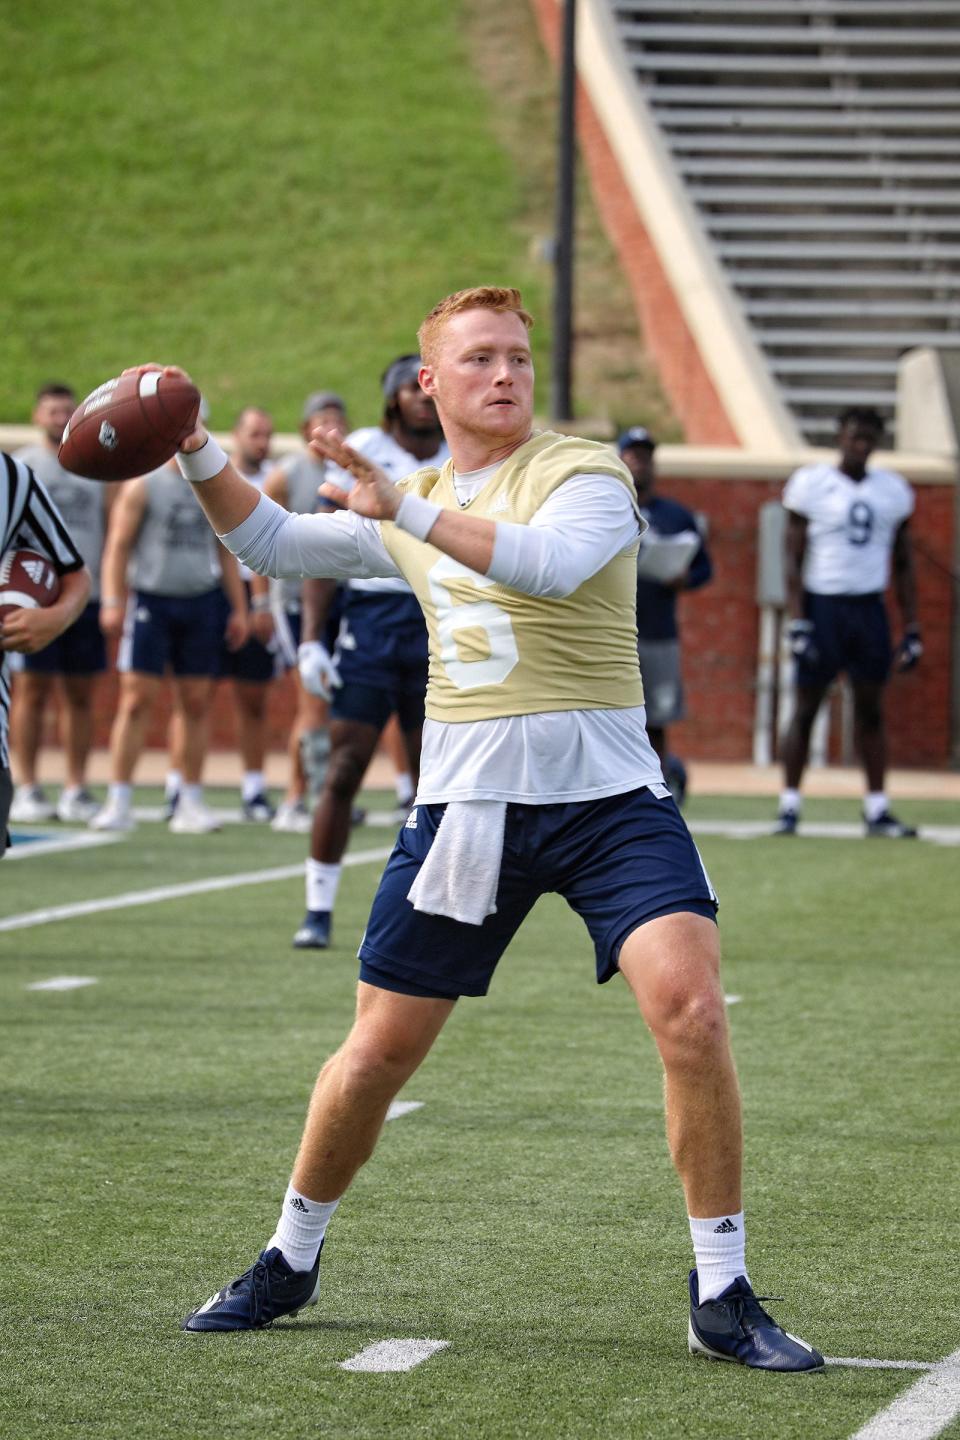 Finally, a fun byproduct of the transfer portal. Georgia Southern quarterback Kyle Vantrease will lead the Eagles against Buffalo, the team he played for last year. Congratulations to the Camelia Bowl, which will have one of the best pregame storylines in all of bowl season.